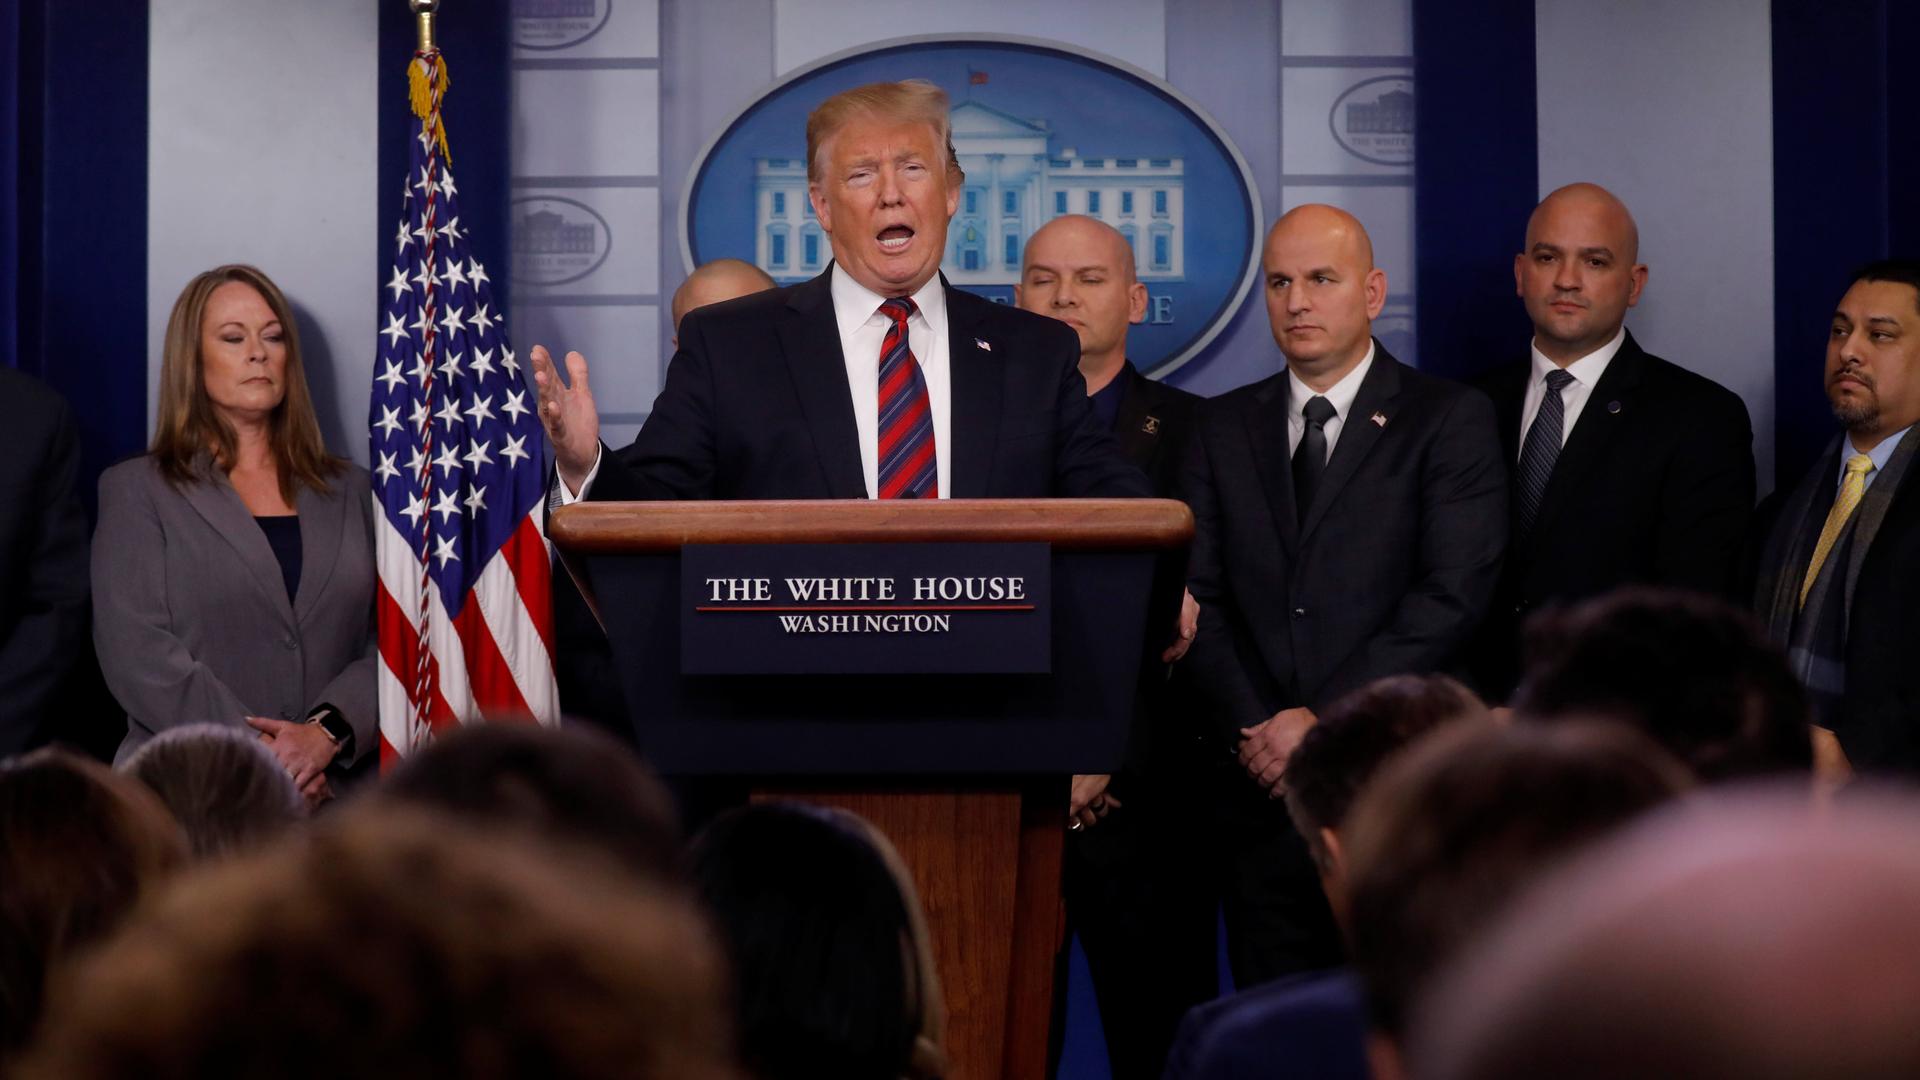 President Trump speaks at a podium while 3 bald men stand behind him.